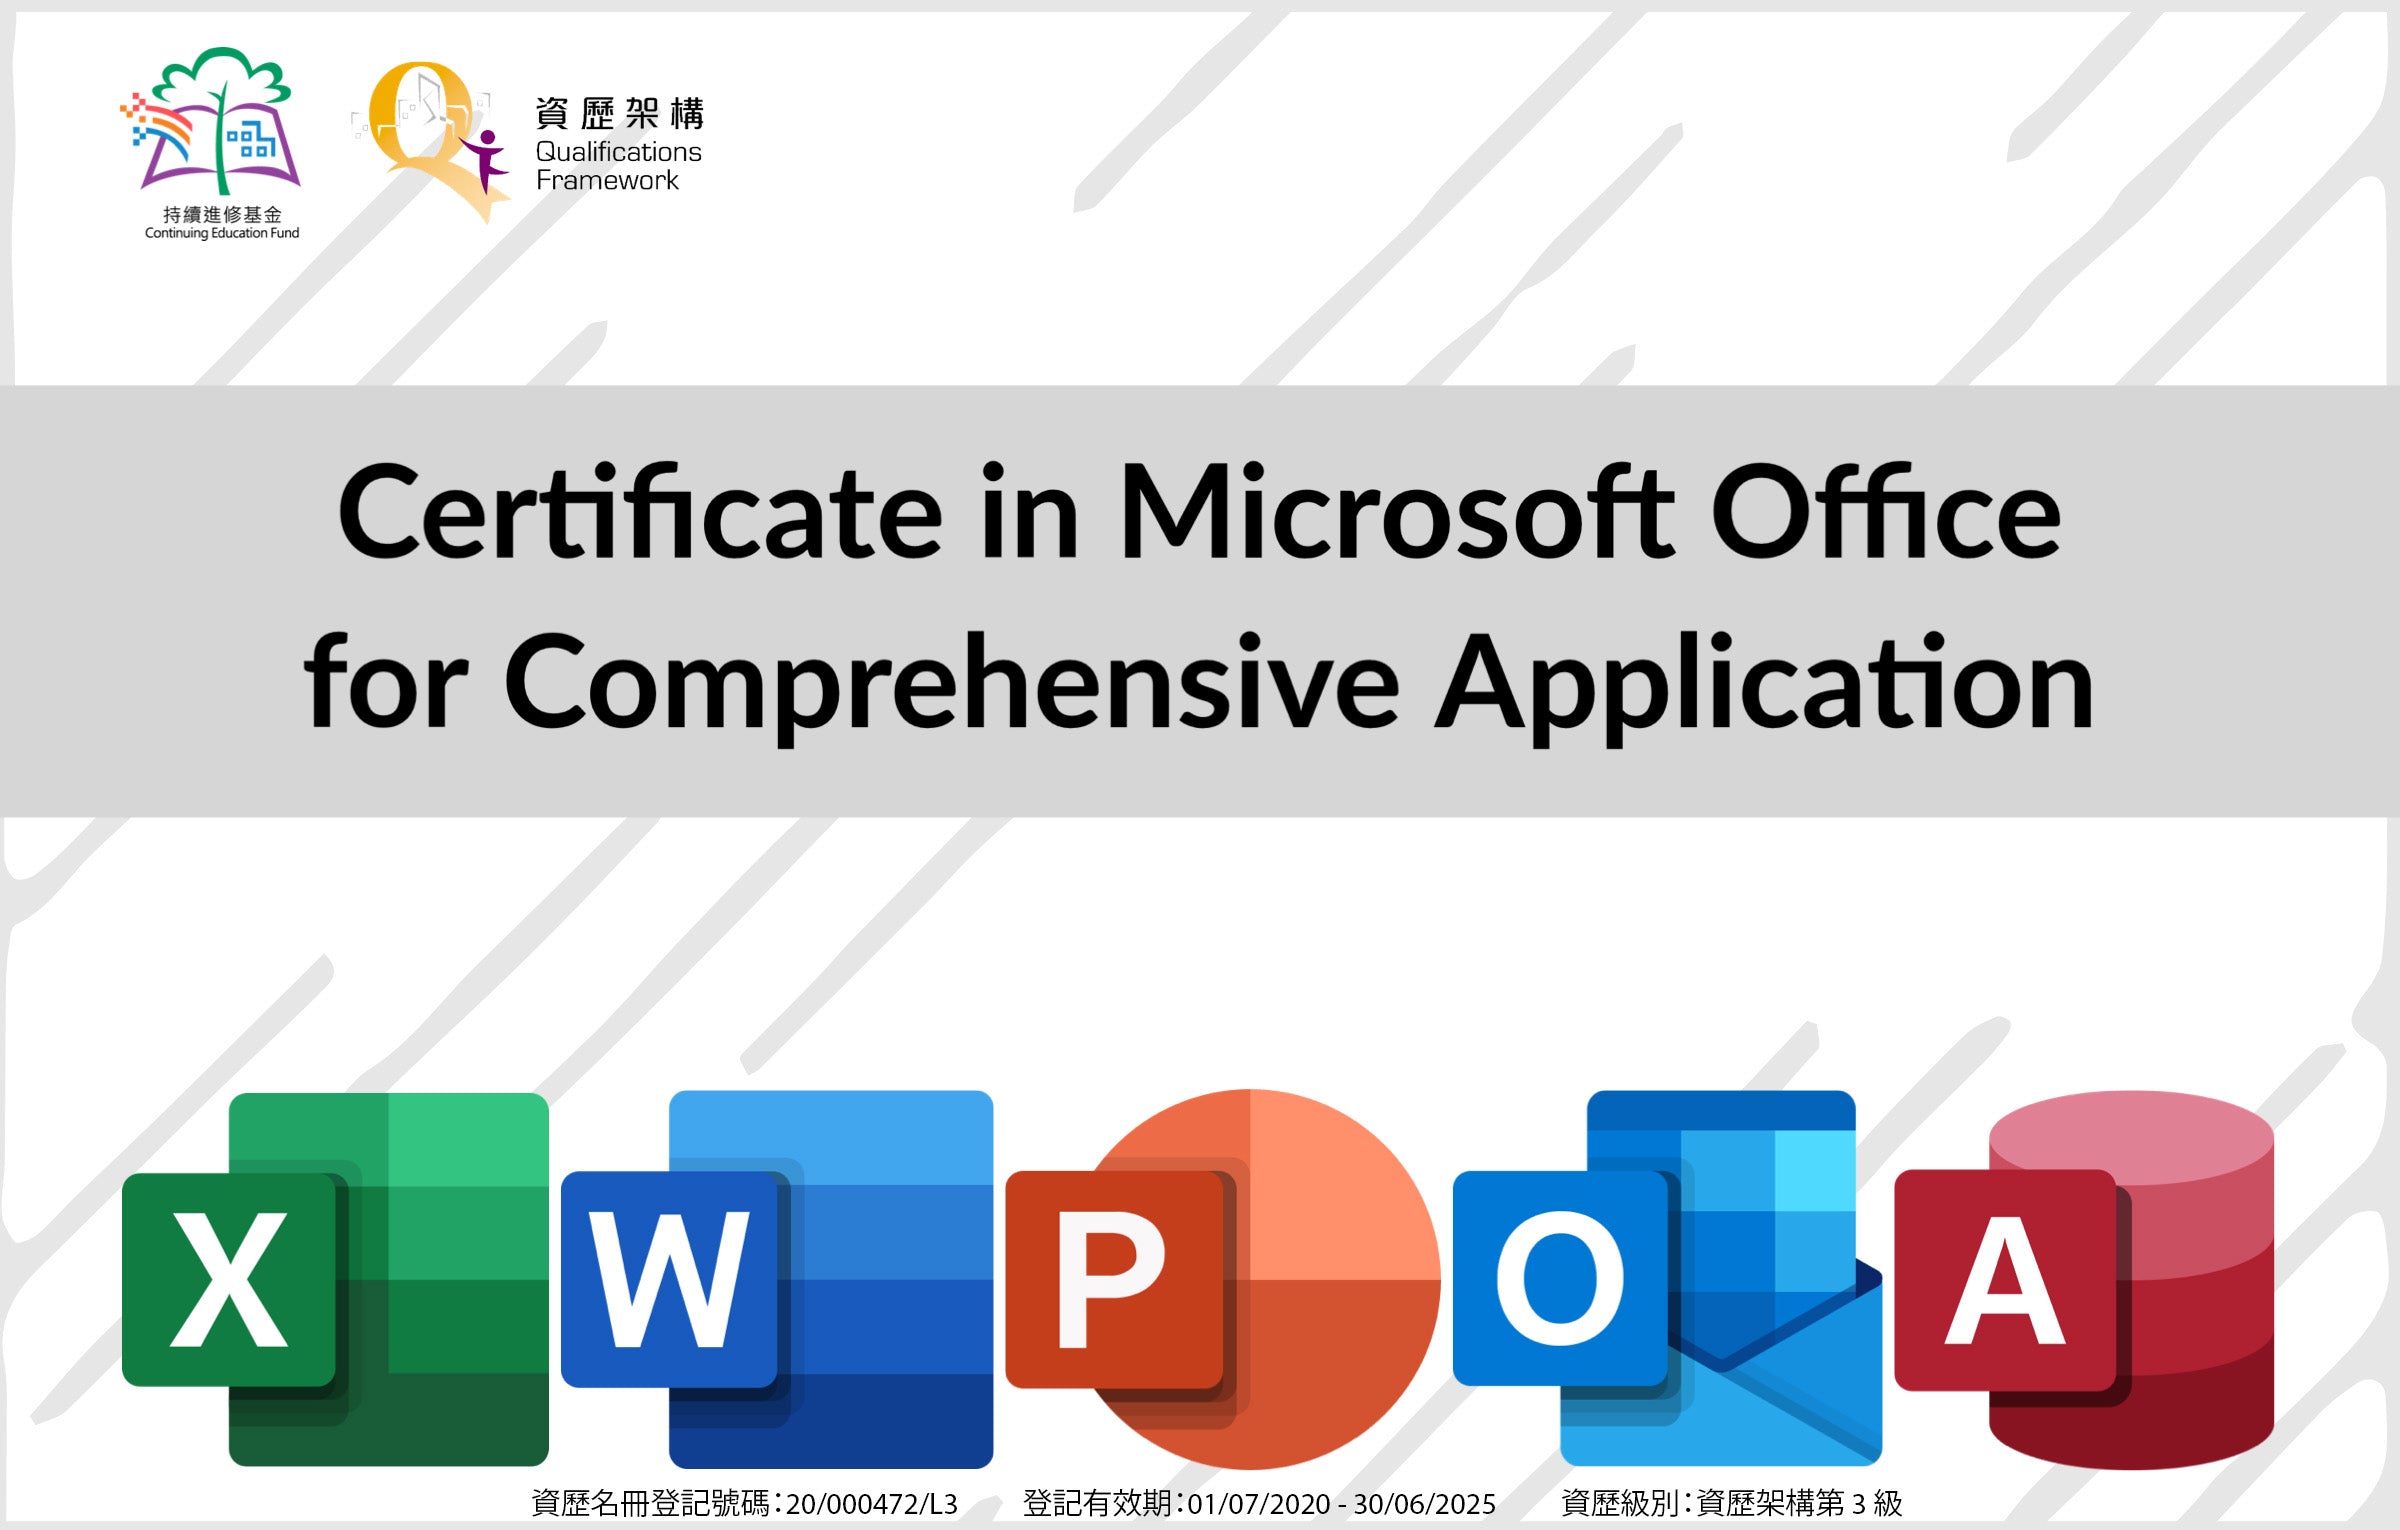 Certificate in Microsoft Office for Comprehensive Application - 4 月份